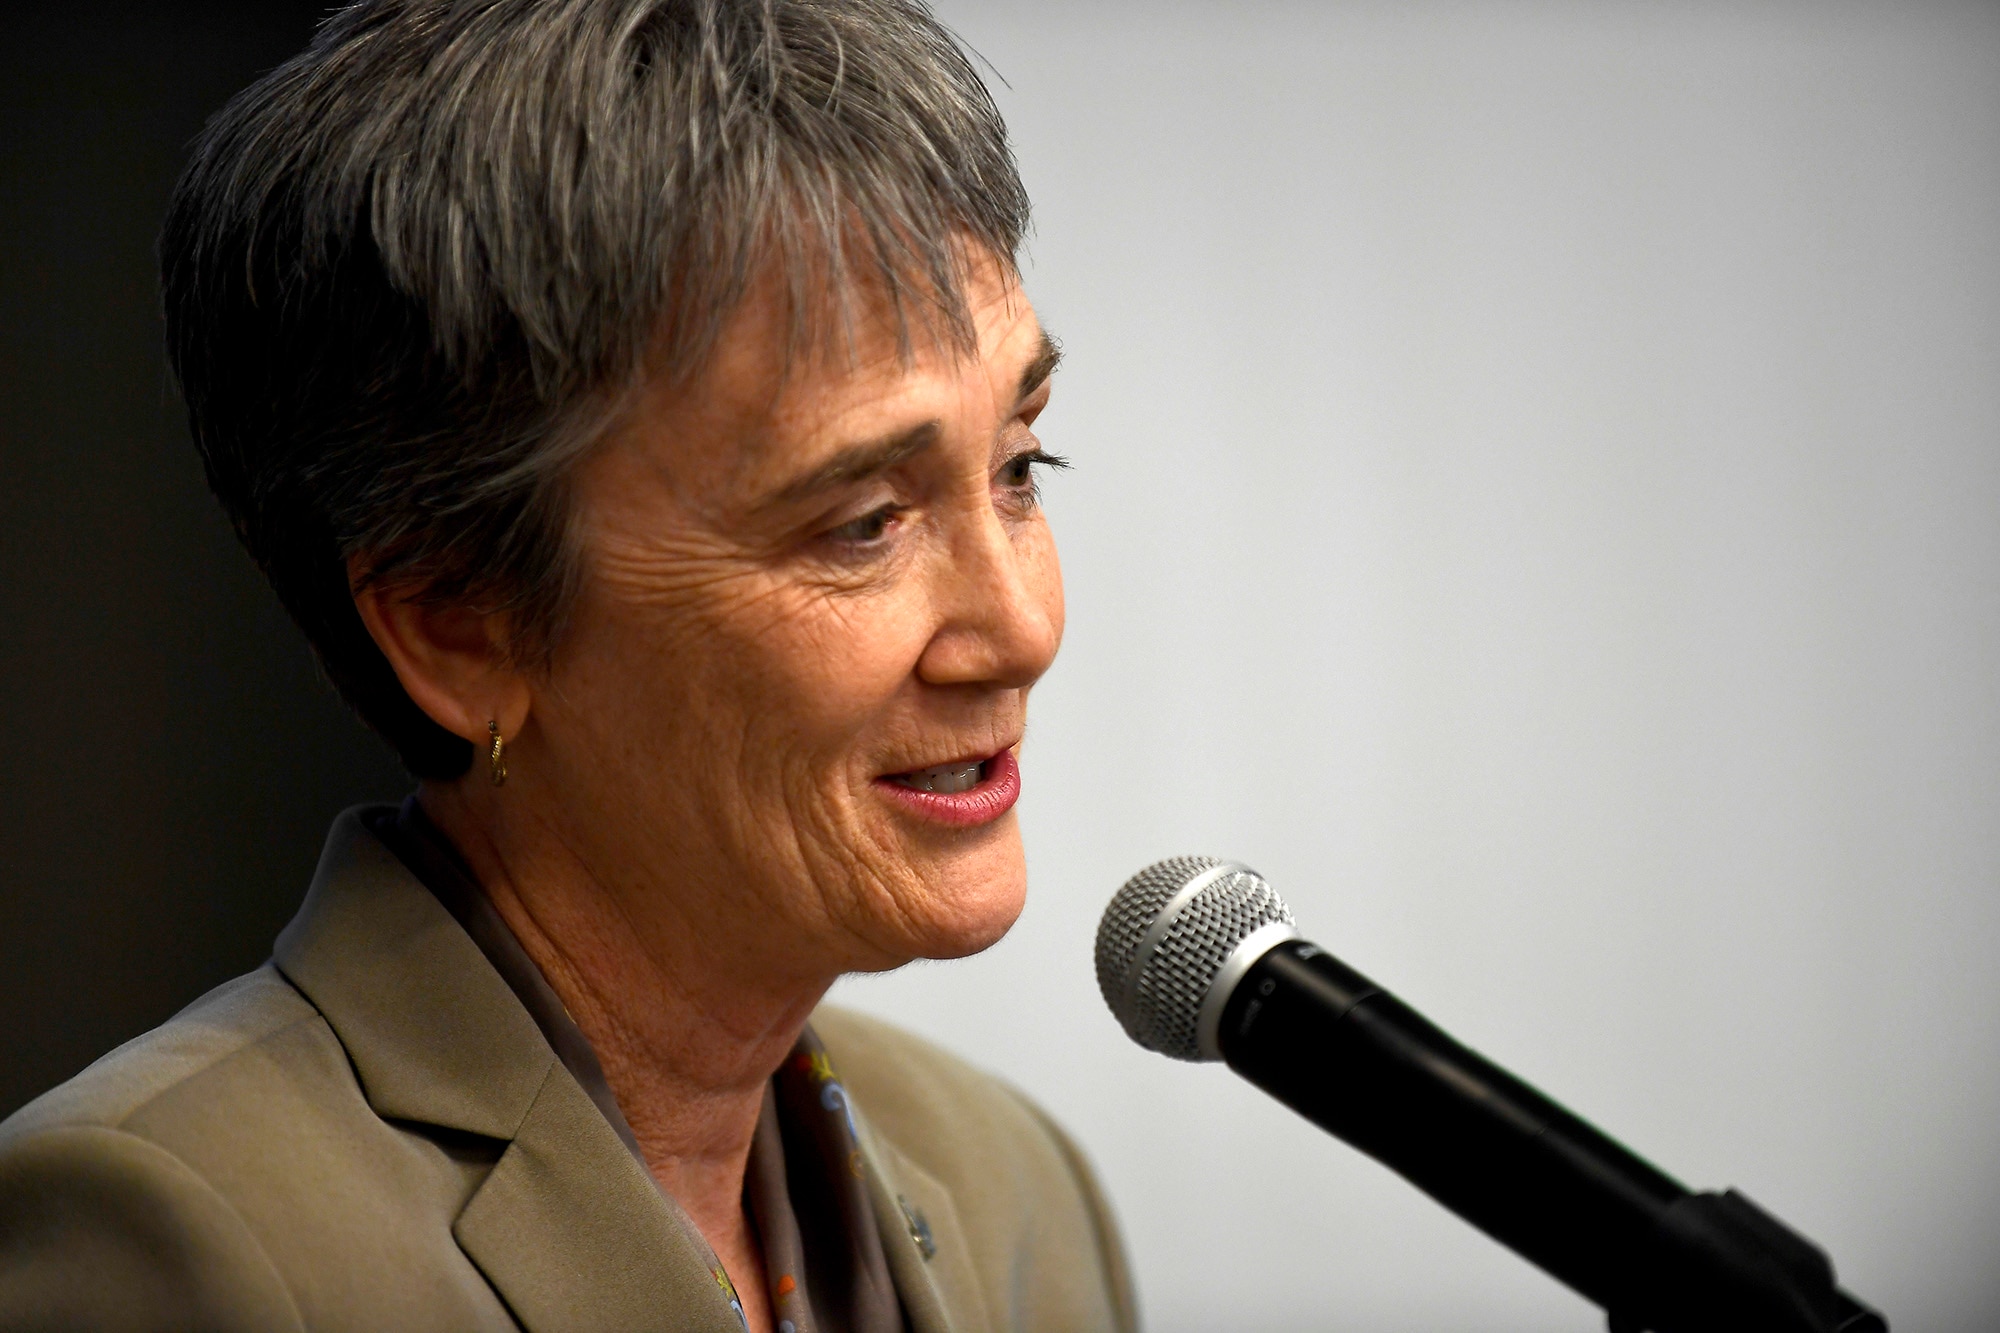 Secretary of the Air Force Heather Wilson speaks prior to signing a letter of intent with the National Science Foundation in Washington, D.C., May 9, 2018. The letter of intent initiates a strategic partnership focused on research in four areas of common interest: space operations and geosciences, advanced material sciences, information and data sciences, and workforce and processes. (U.S. Air Force photo by Staff Sgt. Rusty Frank)